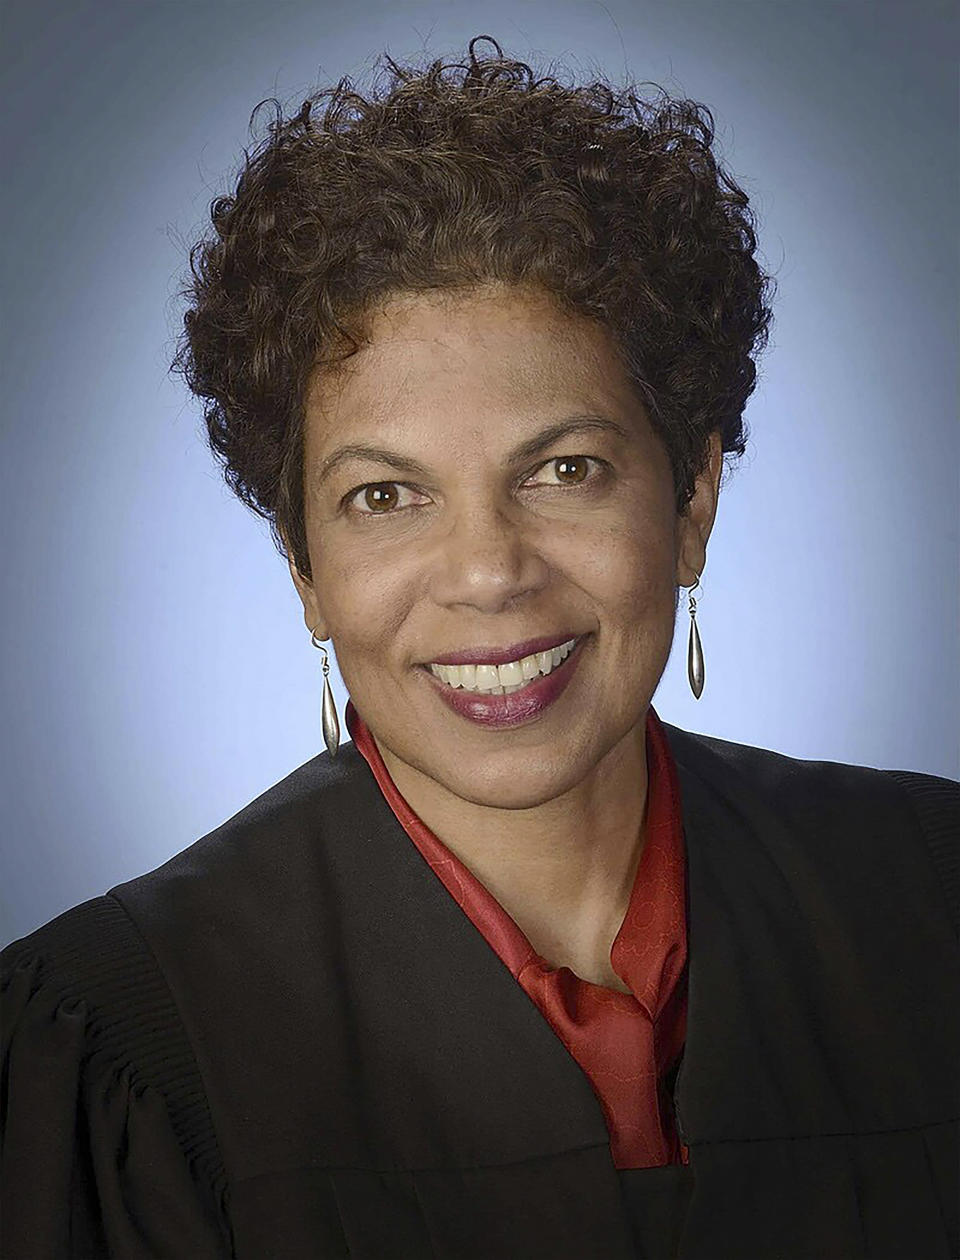 FILE - This undated photo provided by the Administrative Office of the U.S. Courts, shows U.S. District Judge Tanya Chutkan. Chutkan is initially assigned to the election fraud case against former President Donald Trump. Former President Donald Trump and his legal team face long odds in their bid to move his 2020 election conspiracy trial out of Washington. They argue the Republican former president can’t possibly get a fair trial in the overwhelmingly Democratic nation’s capital. (Administrative Office of the U.S. Courts via AP, File)